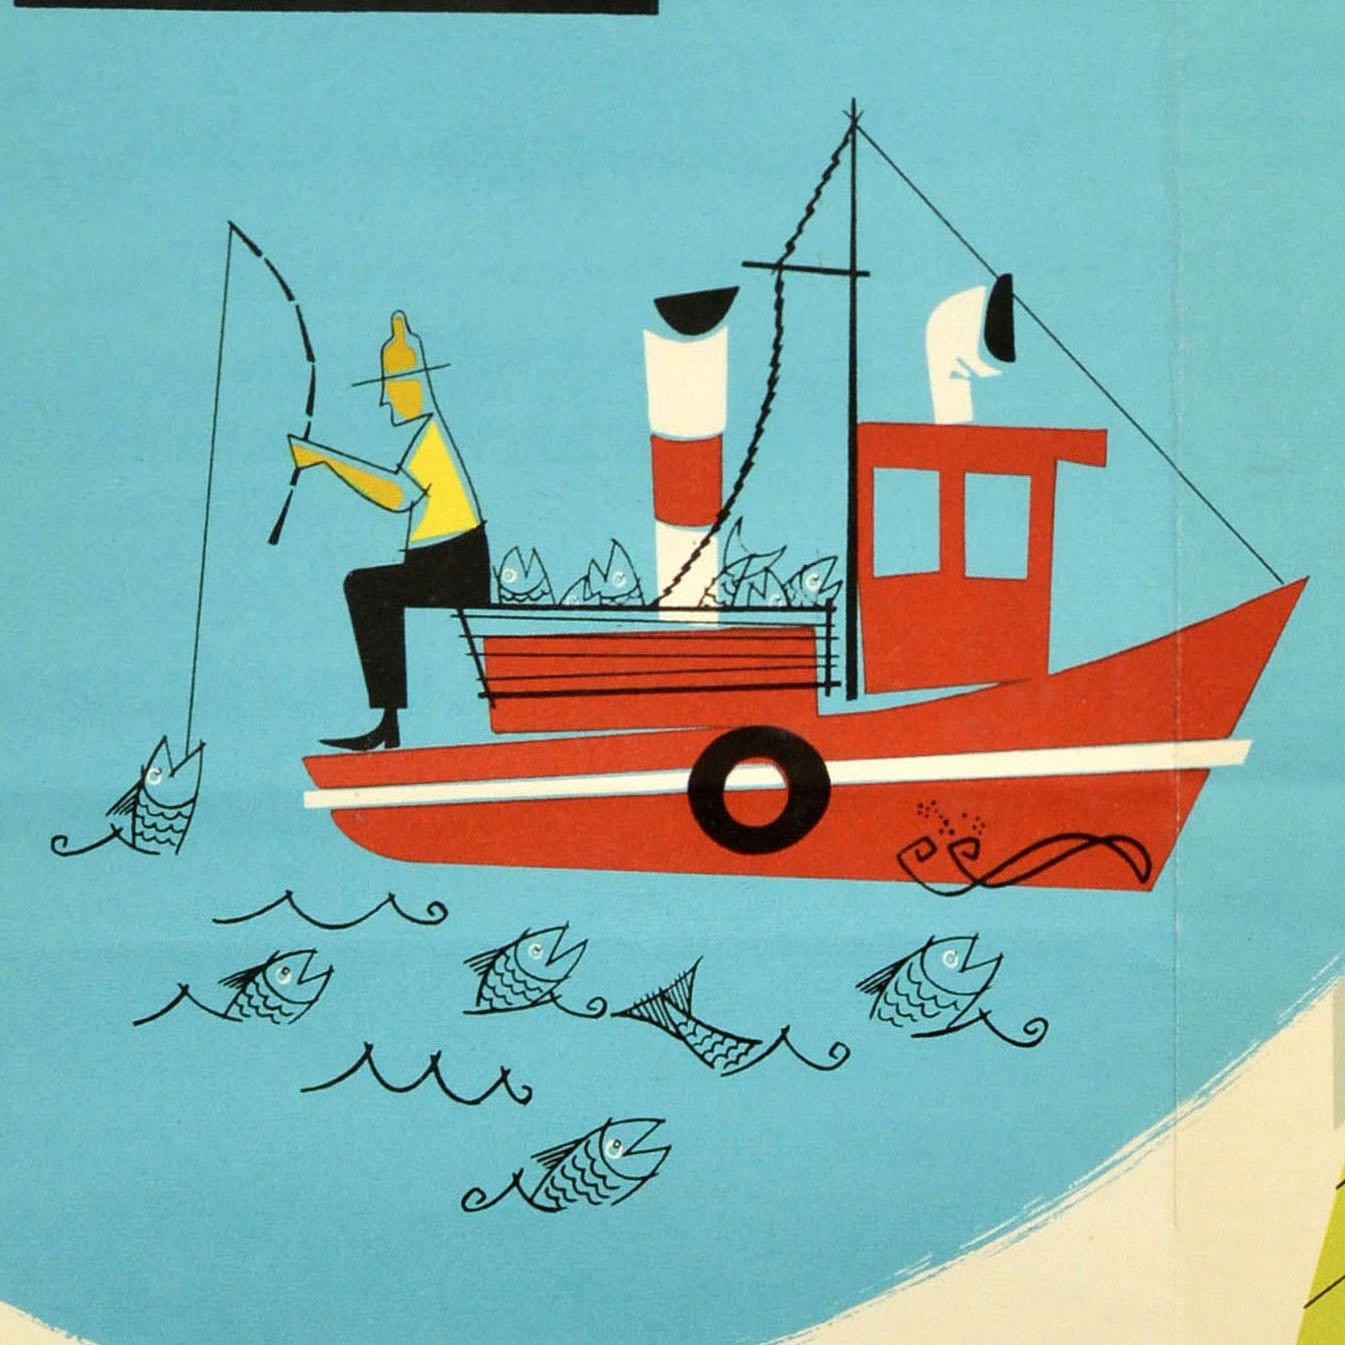 Original Vintage Travel Poster KLM Royal Dutch Airlines Canada Fisherman Design - Print by Unknown